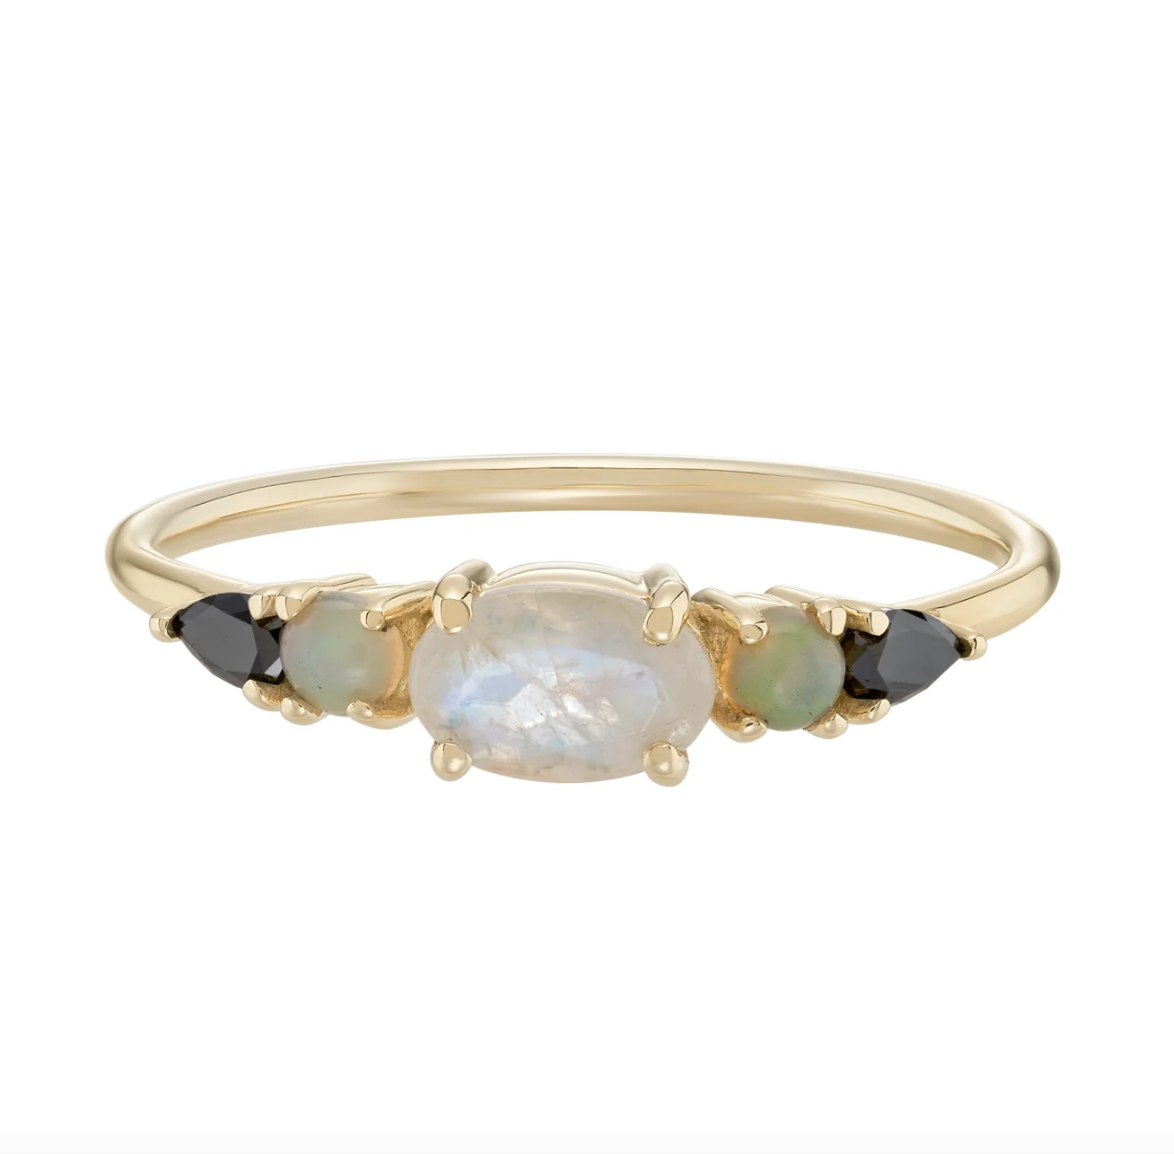 a gold 5 stone ring with moonstone, opal, and black diamonds on a white background